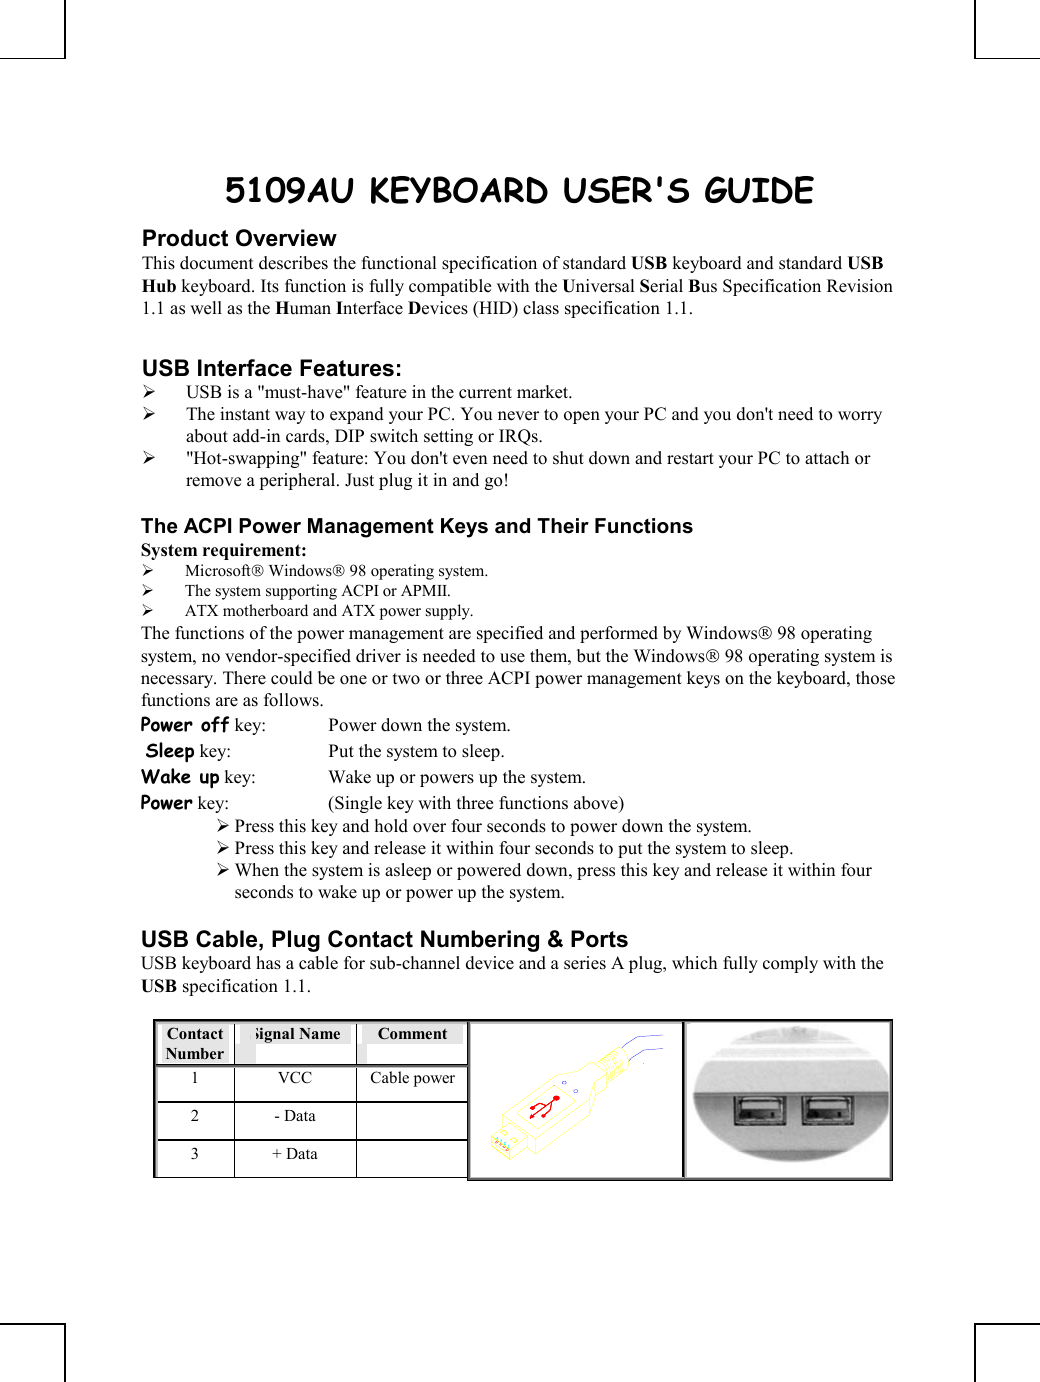       5109AU KEYBOARD USER&apos;S GUIDE Product Overview This document describes the functional specification of standard USB keyboard and standard USB Hub keyboard. Its function is fully compatible with the Universal Serial Bus Specification Revision 1.1 as well as the Human Interface Devices (HID) class specification 1.1.  USB Interface Features:   USB is a &quot;must-have&quot; feature in the current market.   The instant way to expand your PC. You never to open your PC and you don&apos;t need to worry about add-in cards, DIP switch setting or IRQs.   &quot;Hot-swapping&quot; feature: You don&apos;t even need to shut down and restart your PC to attach or remove a peripheral. Just plug it in and go!  The ACPI Power Management Keys and Their Functions System requirement:    Microsoft Windows 98 operating system.   The system supporting ACPI or APMII.   ATX motherboard and ATX power supply. The functions of the power management are specified and performed by Windows 98 operating system, no vendor-specified driver is needed to use them, but the Windows 98 operating system is necessary. There could be one or two or three ACPI power management keys on the keyboard, those functions are as follows. Power off key:  Power down the system.  Sleep key:  Put the system to sleep.  Wake up key:  Wake up or powers up the system.  Power key:  (Single key with three functions above)       Press this key and hold over four seconds to power down the system.  Press this key and release it within four seconds to put the system to sleep.  When the system is asleep or powered down, press this key and release it within four seconds to wake up or power up the system.  USB Cable, Plug Contact Numbering &amp; Ports USB keyboard has a cable for sub-channel device and a series A plug, which fully comply with the USB specification 1.1.  Contact Number Signal Name   Comment 1 VCC Cable power2 - Data   3 + Data    